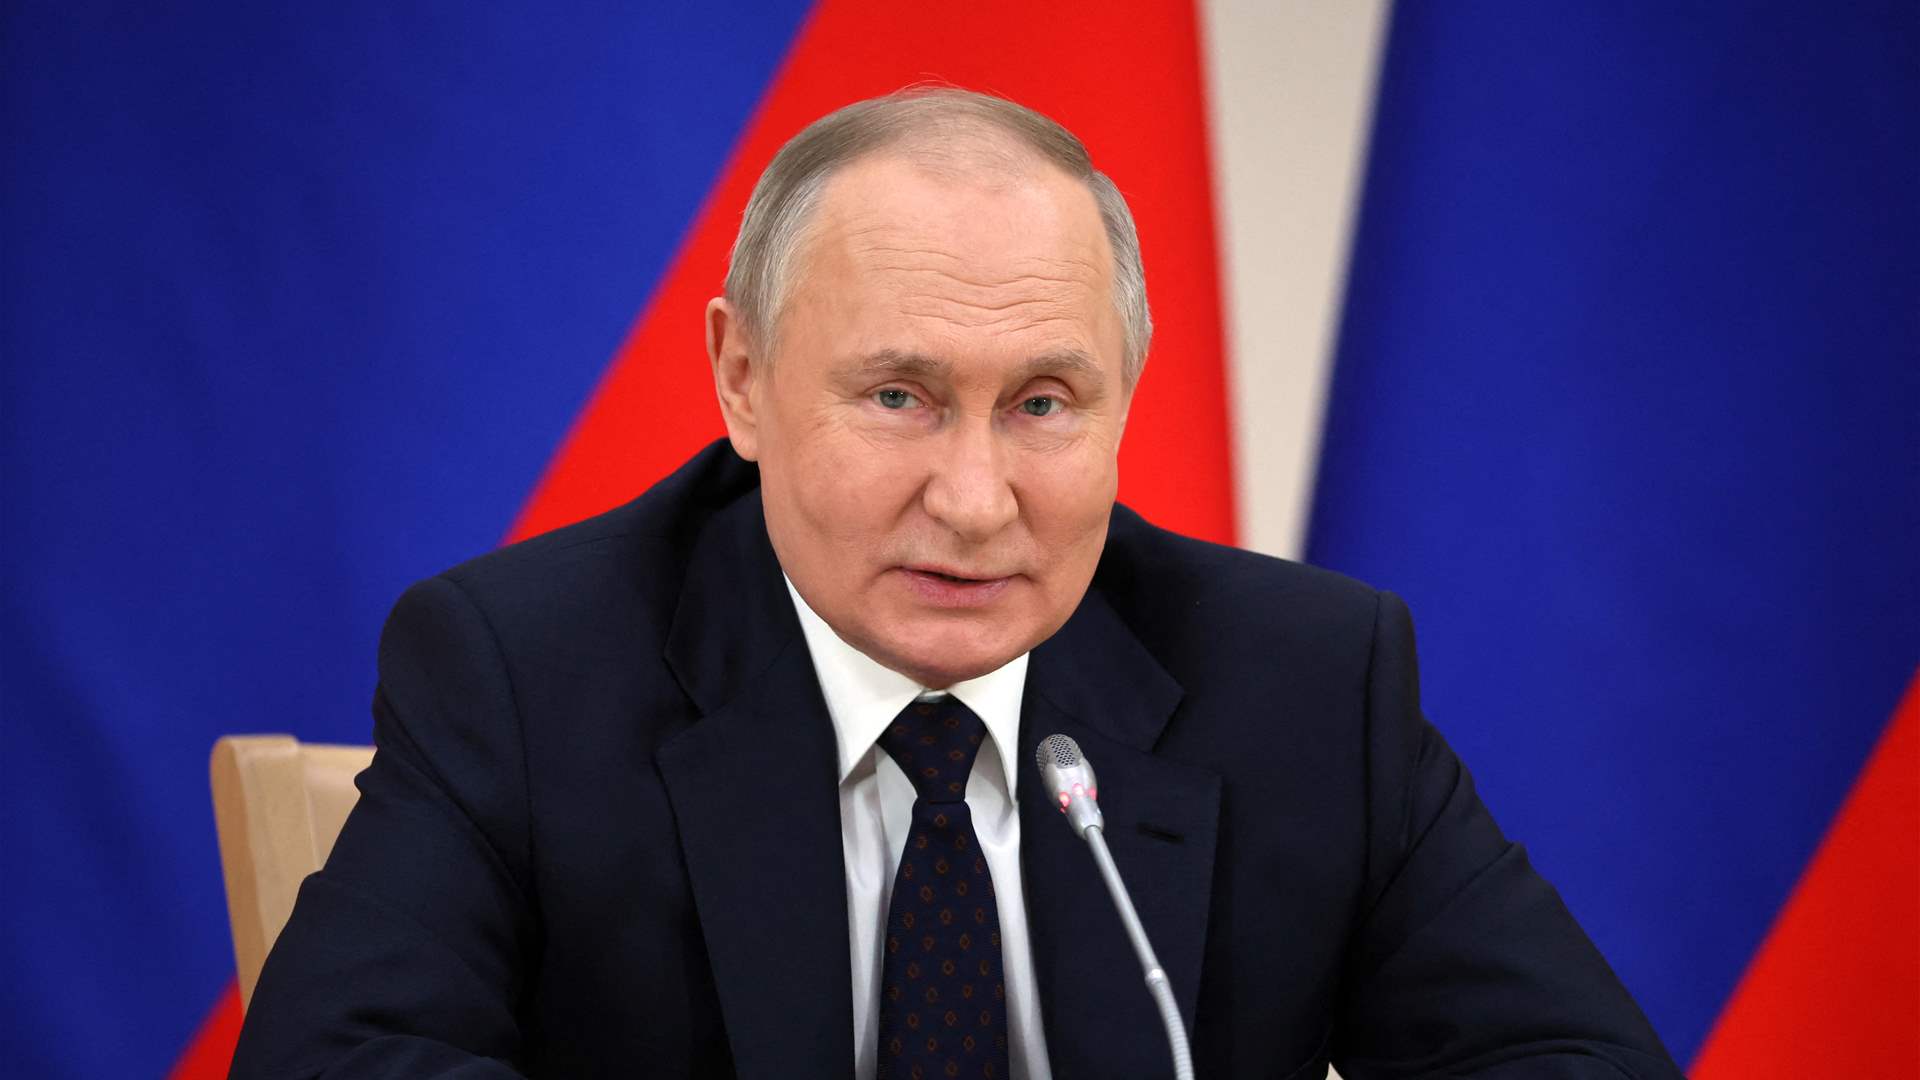 Putin: Russia will work with any elected US leader